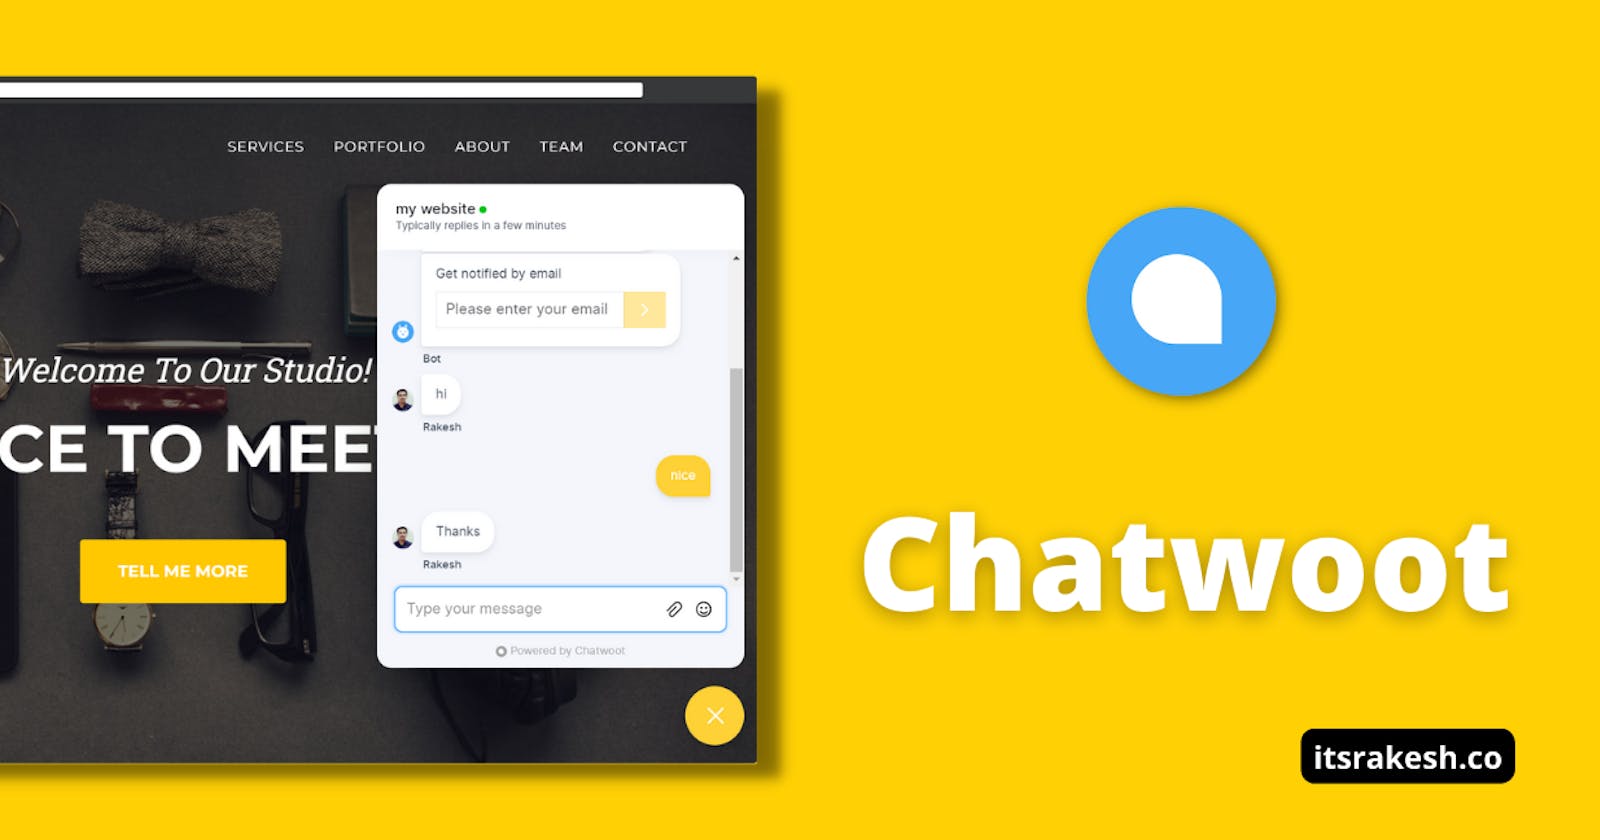 What is Chatwoot and how to integrate it on your website?